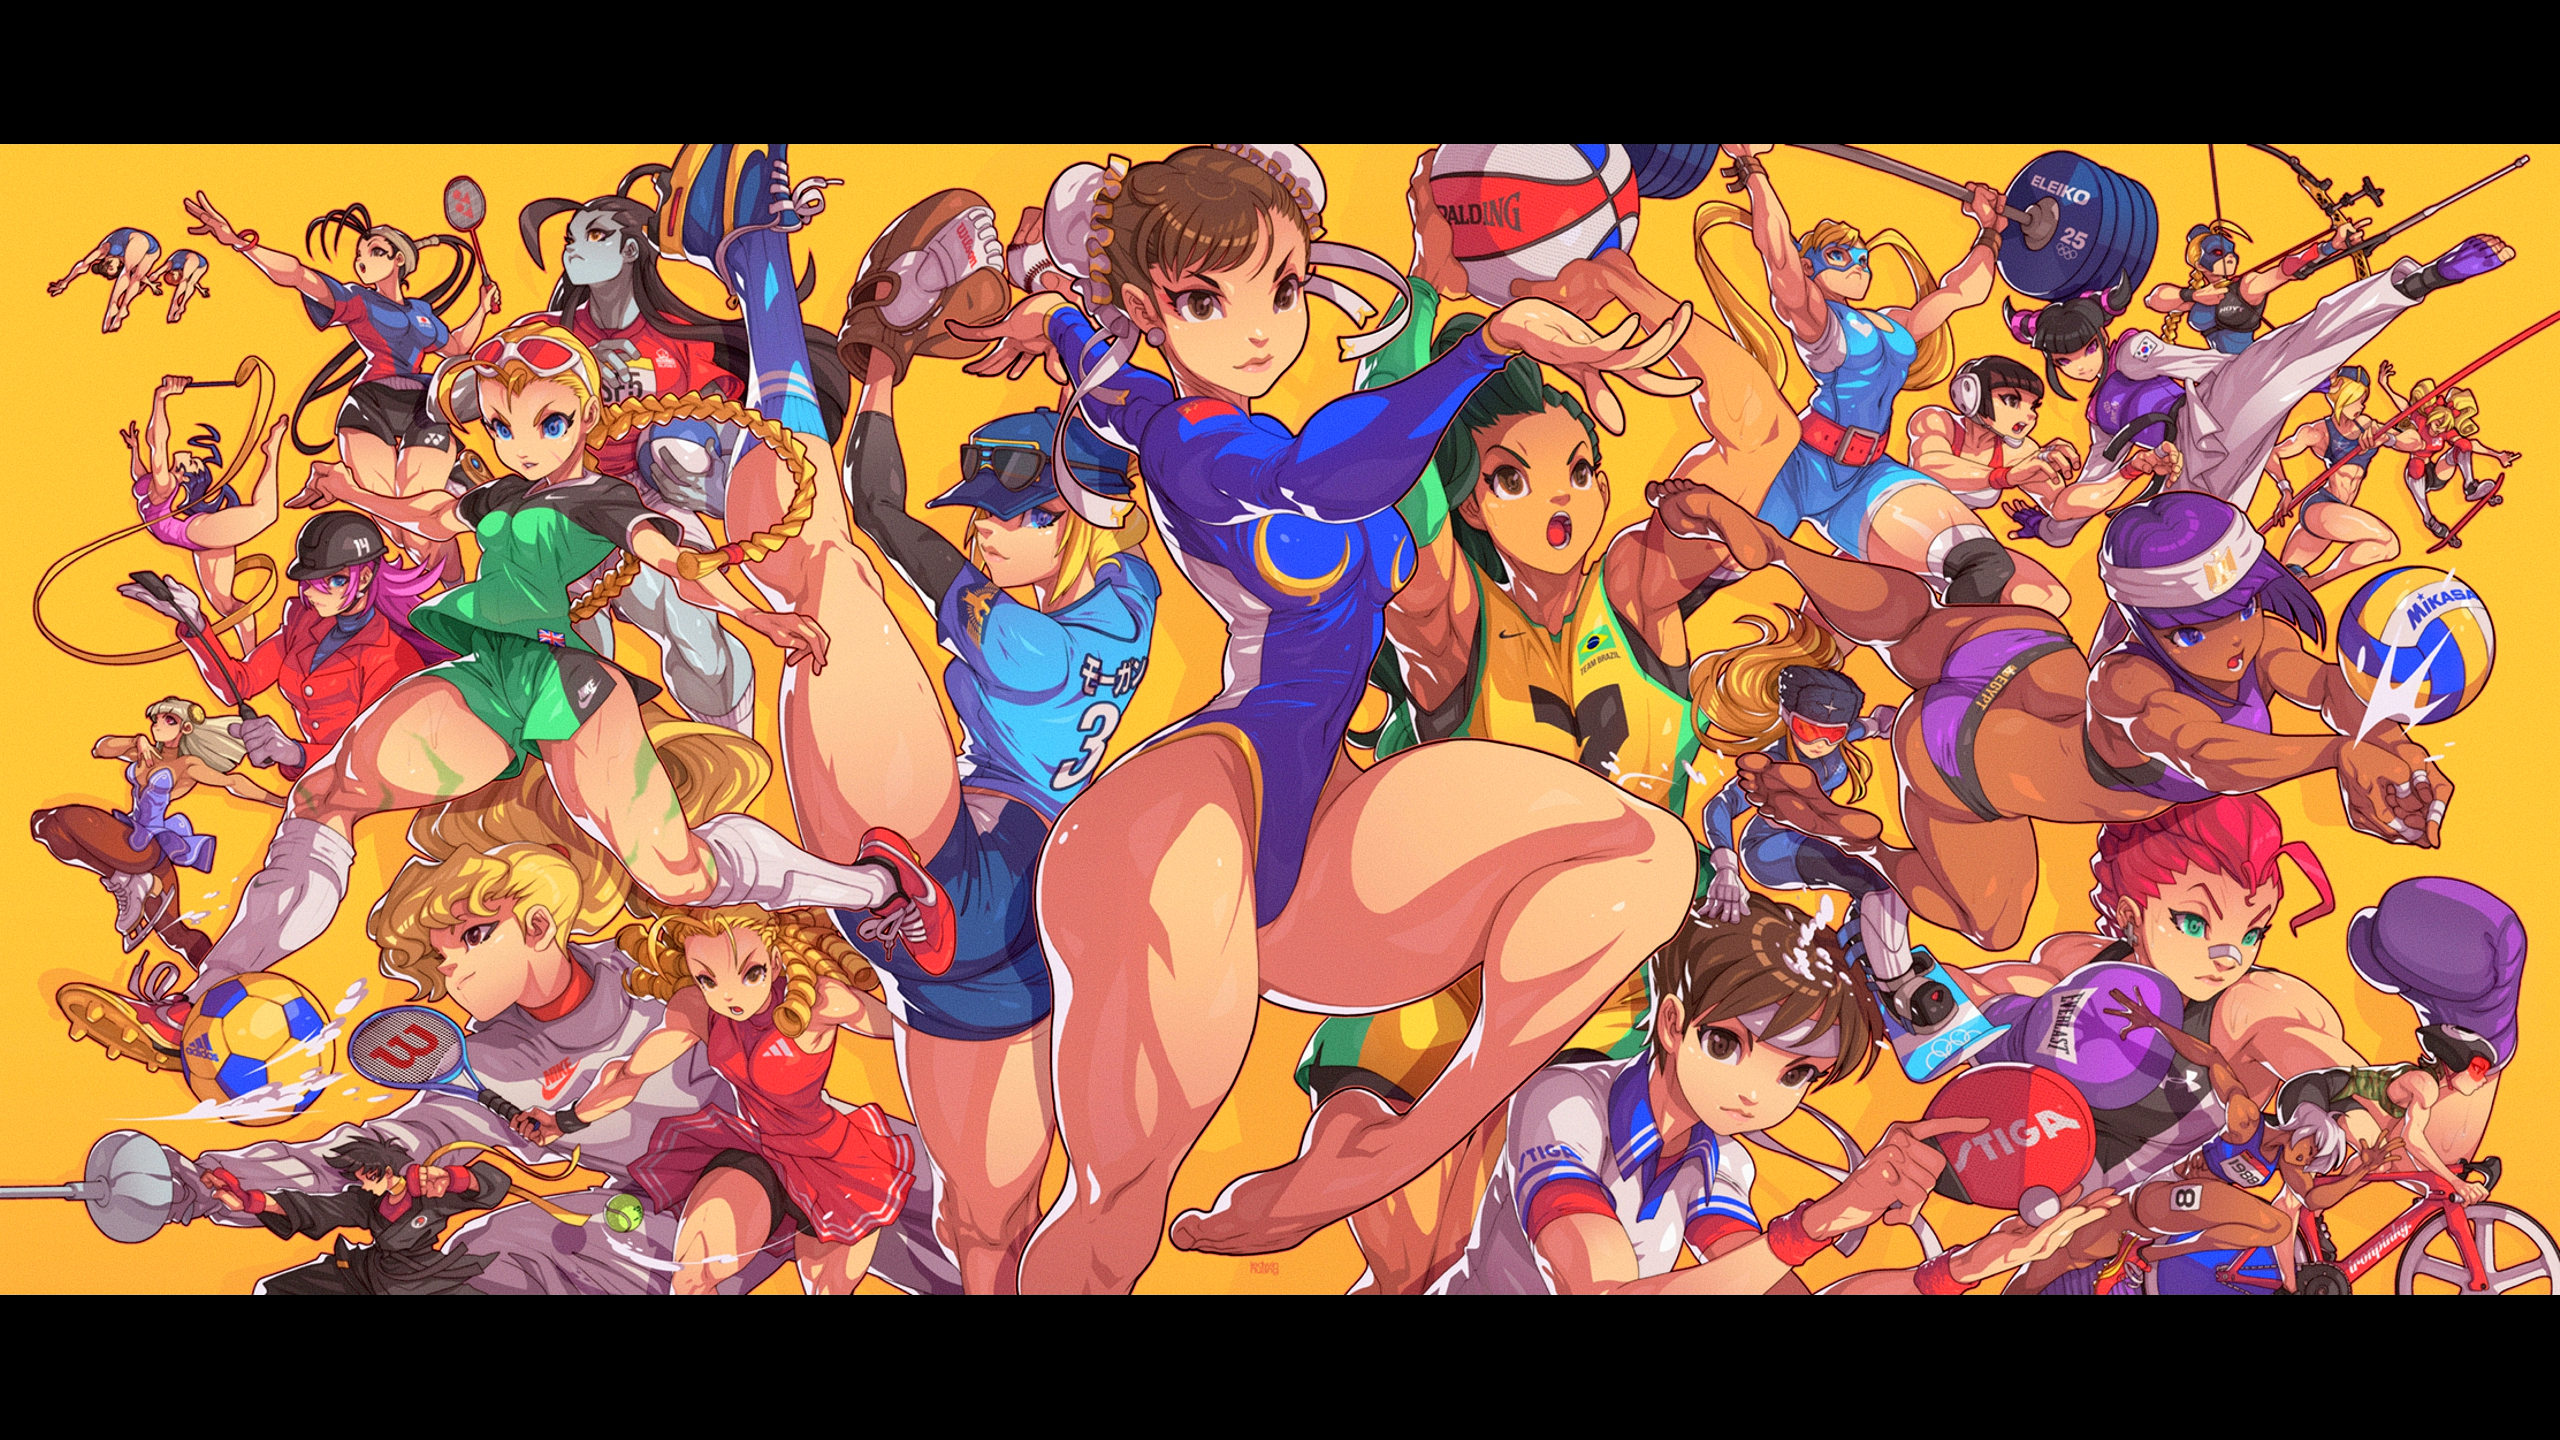 Anime 2560x1440 Street Fighter Street Fighter II - The World Warrior Street Fighter 3RD Strike Street Fighter Alpha Street Fighter IV Street Fighter V Street Fighter VI Chun-Li Capcom sakura (street fighter) Rainbow Mika Cammy White Ibuki (Street Fighter) sports bra sport boxing gloves bicycle volleyball volleyball player beach volleyball Han Juri weightlifting Fighting Games video games video game girls skateboard skateboarding gymnast gymnastics baseball baseball cap swimmer olympic Olympic Games bright